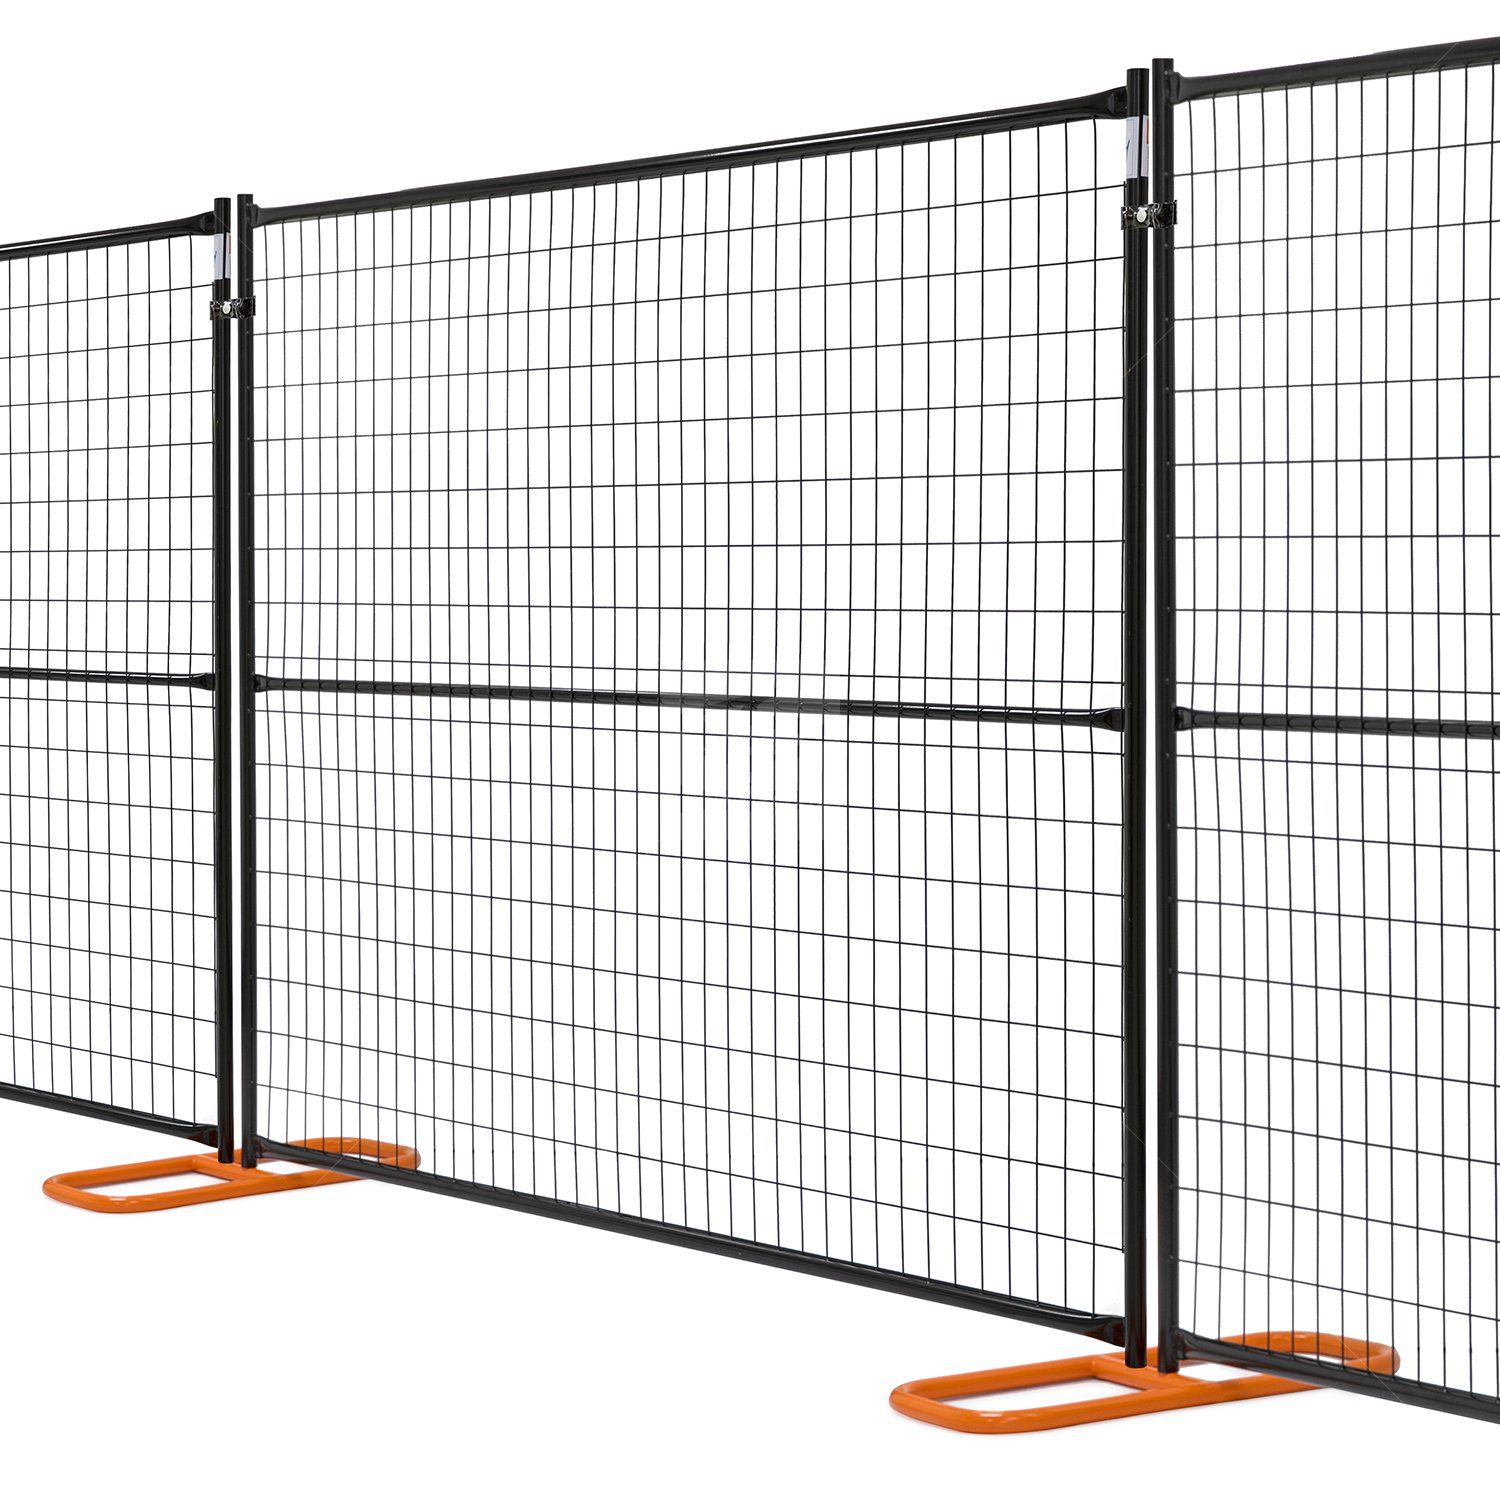 Wire Fence. Best wholesale direct Welded Wire Fence and Hardware Cloth